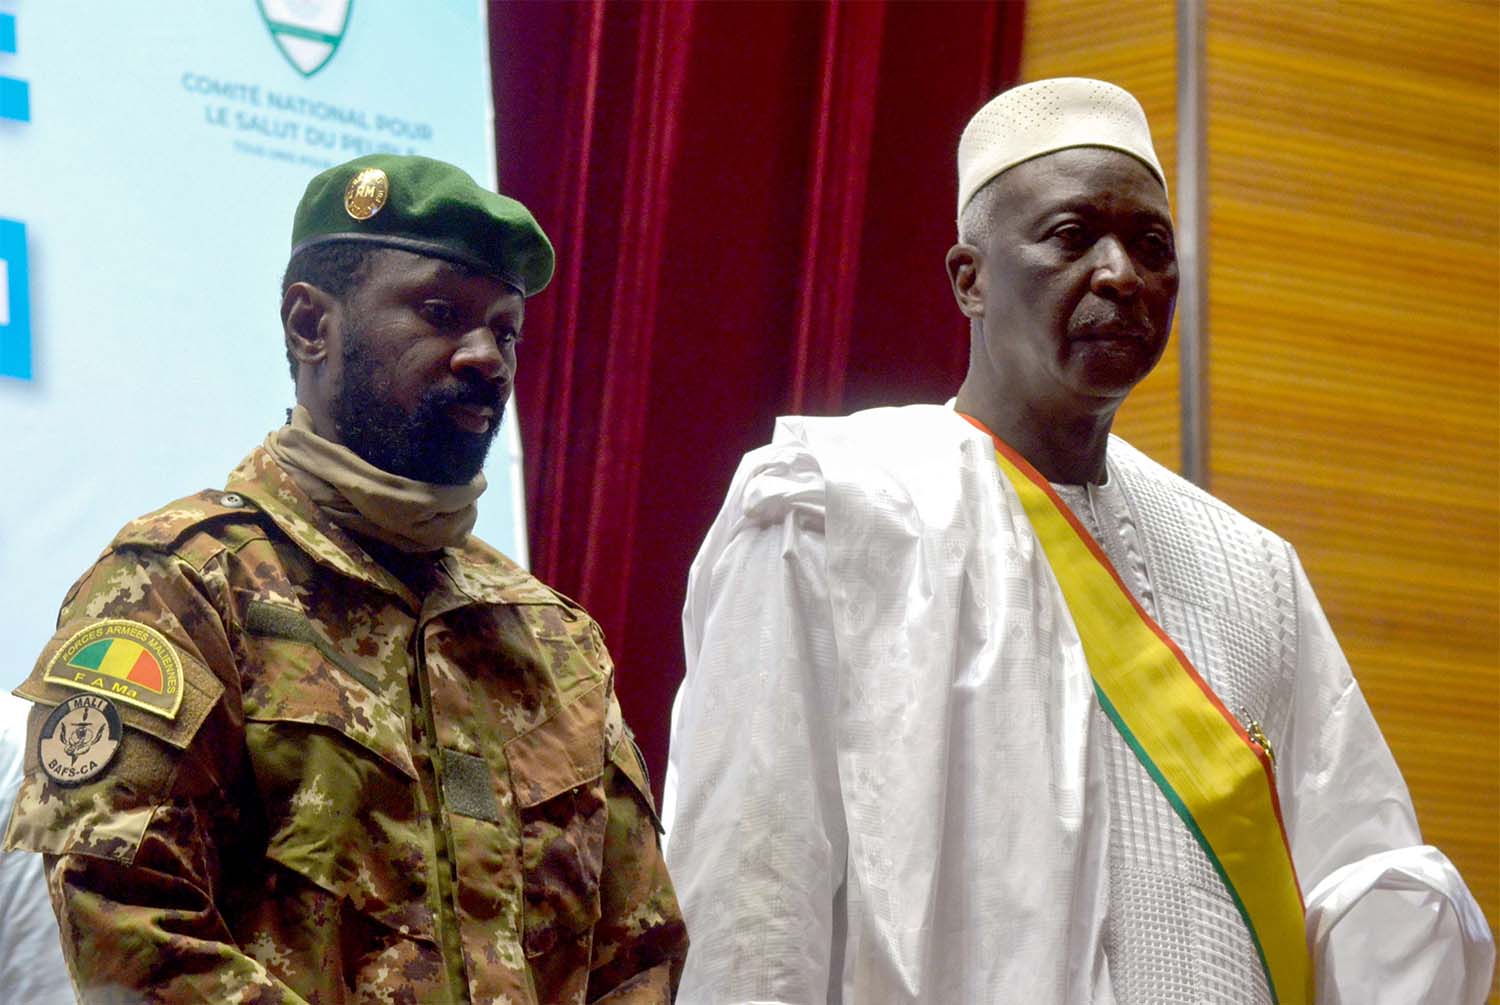 Goita (L) is Mali's vice president in charge of security and defence issues